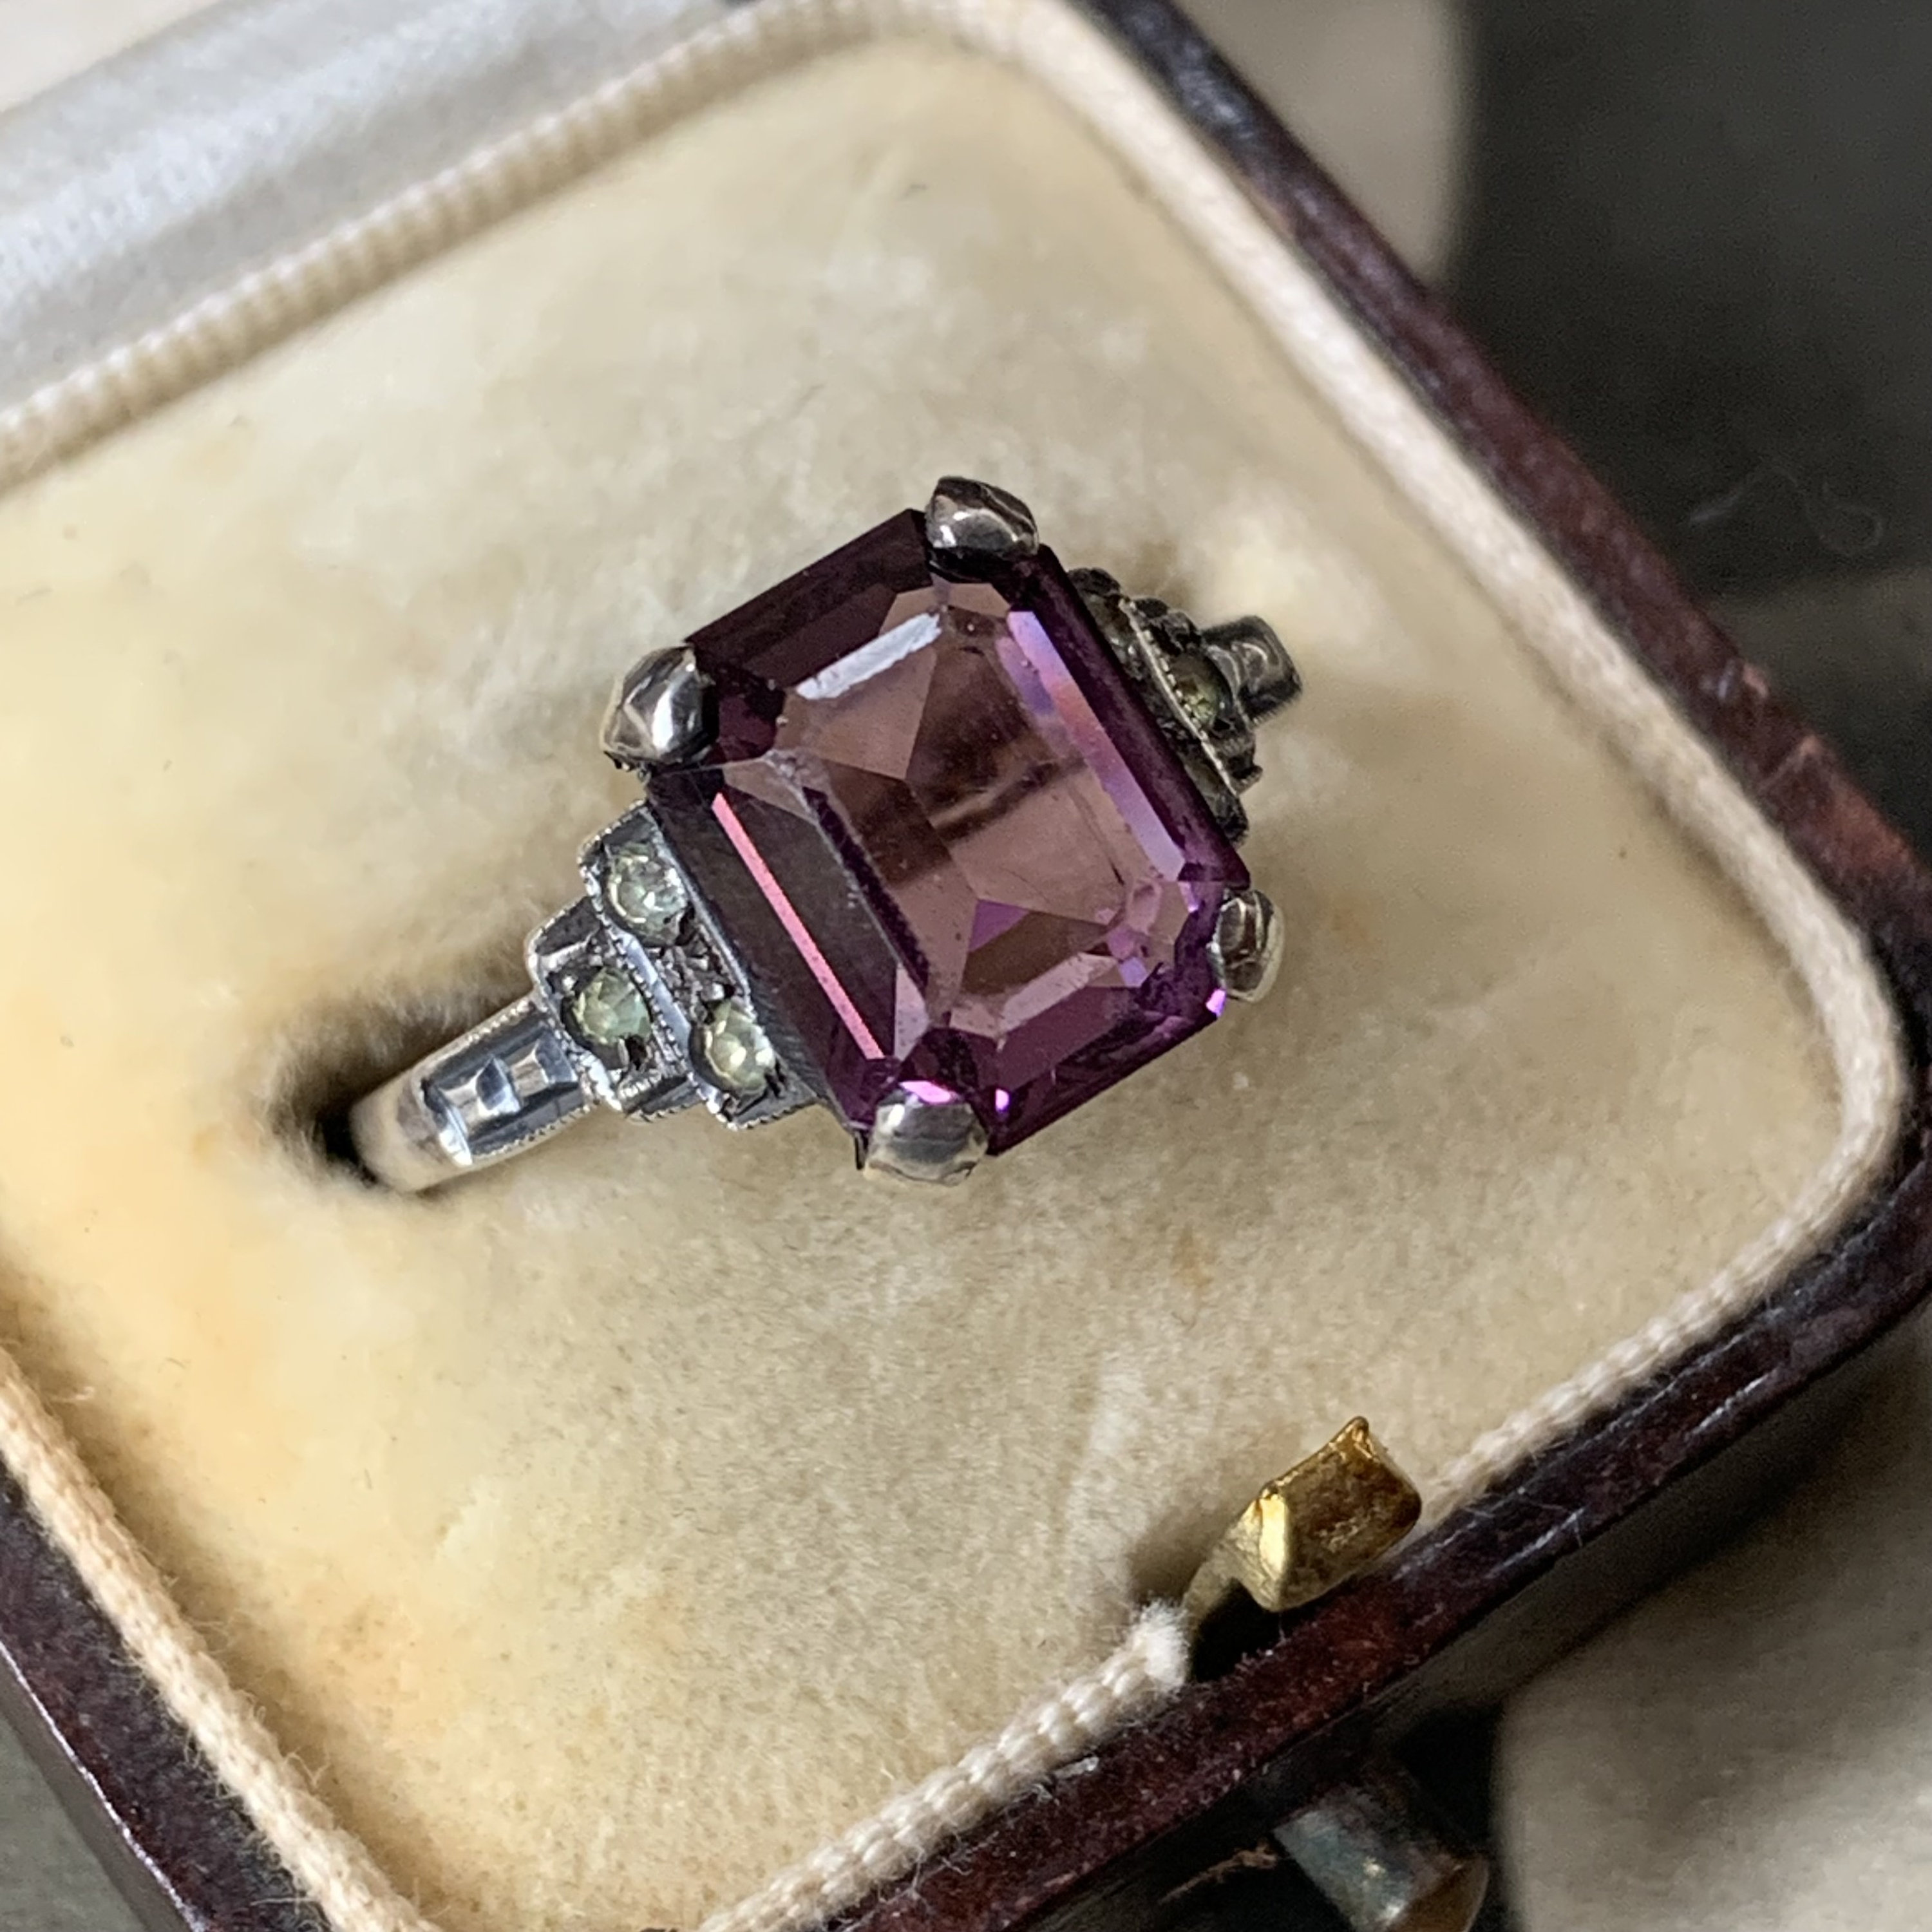 9Ct Gold & Silver Art Deco Ring Set With Paste Emerald Cut Amethyst Diamond Stones. An Exquisite From The Art Deco Era